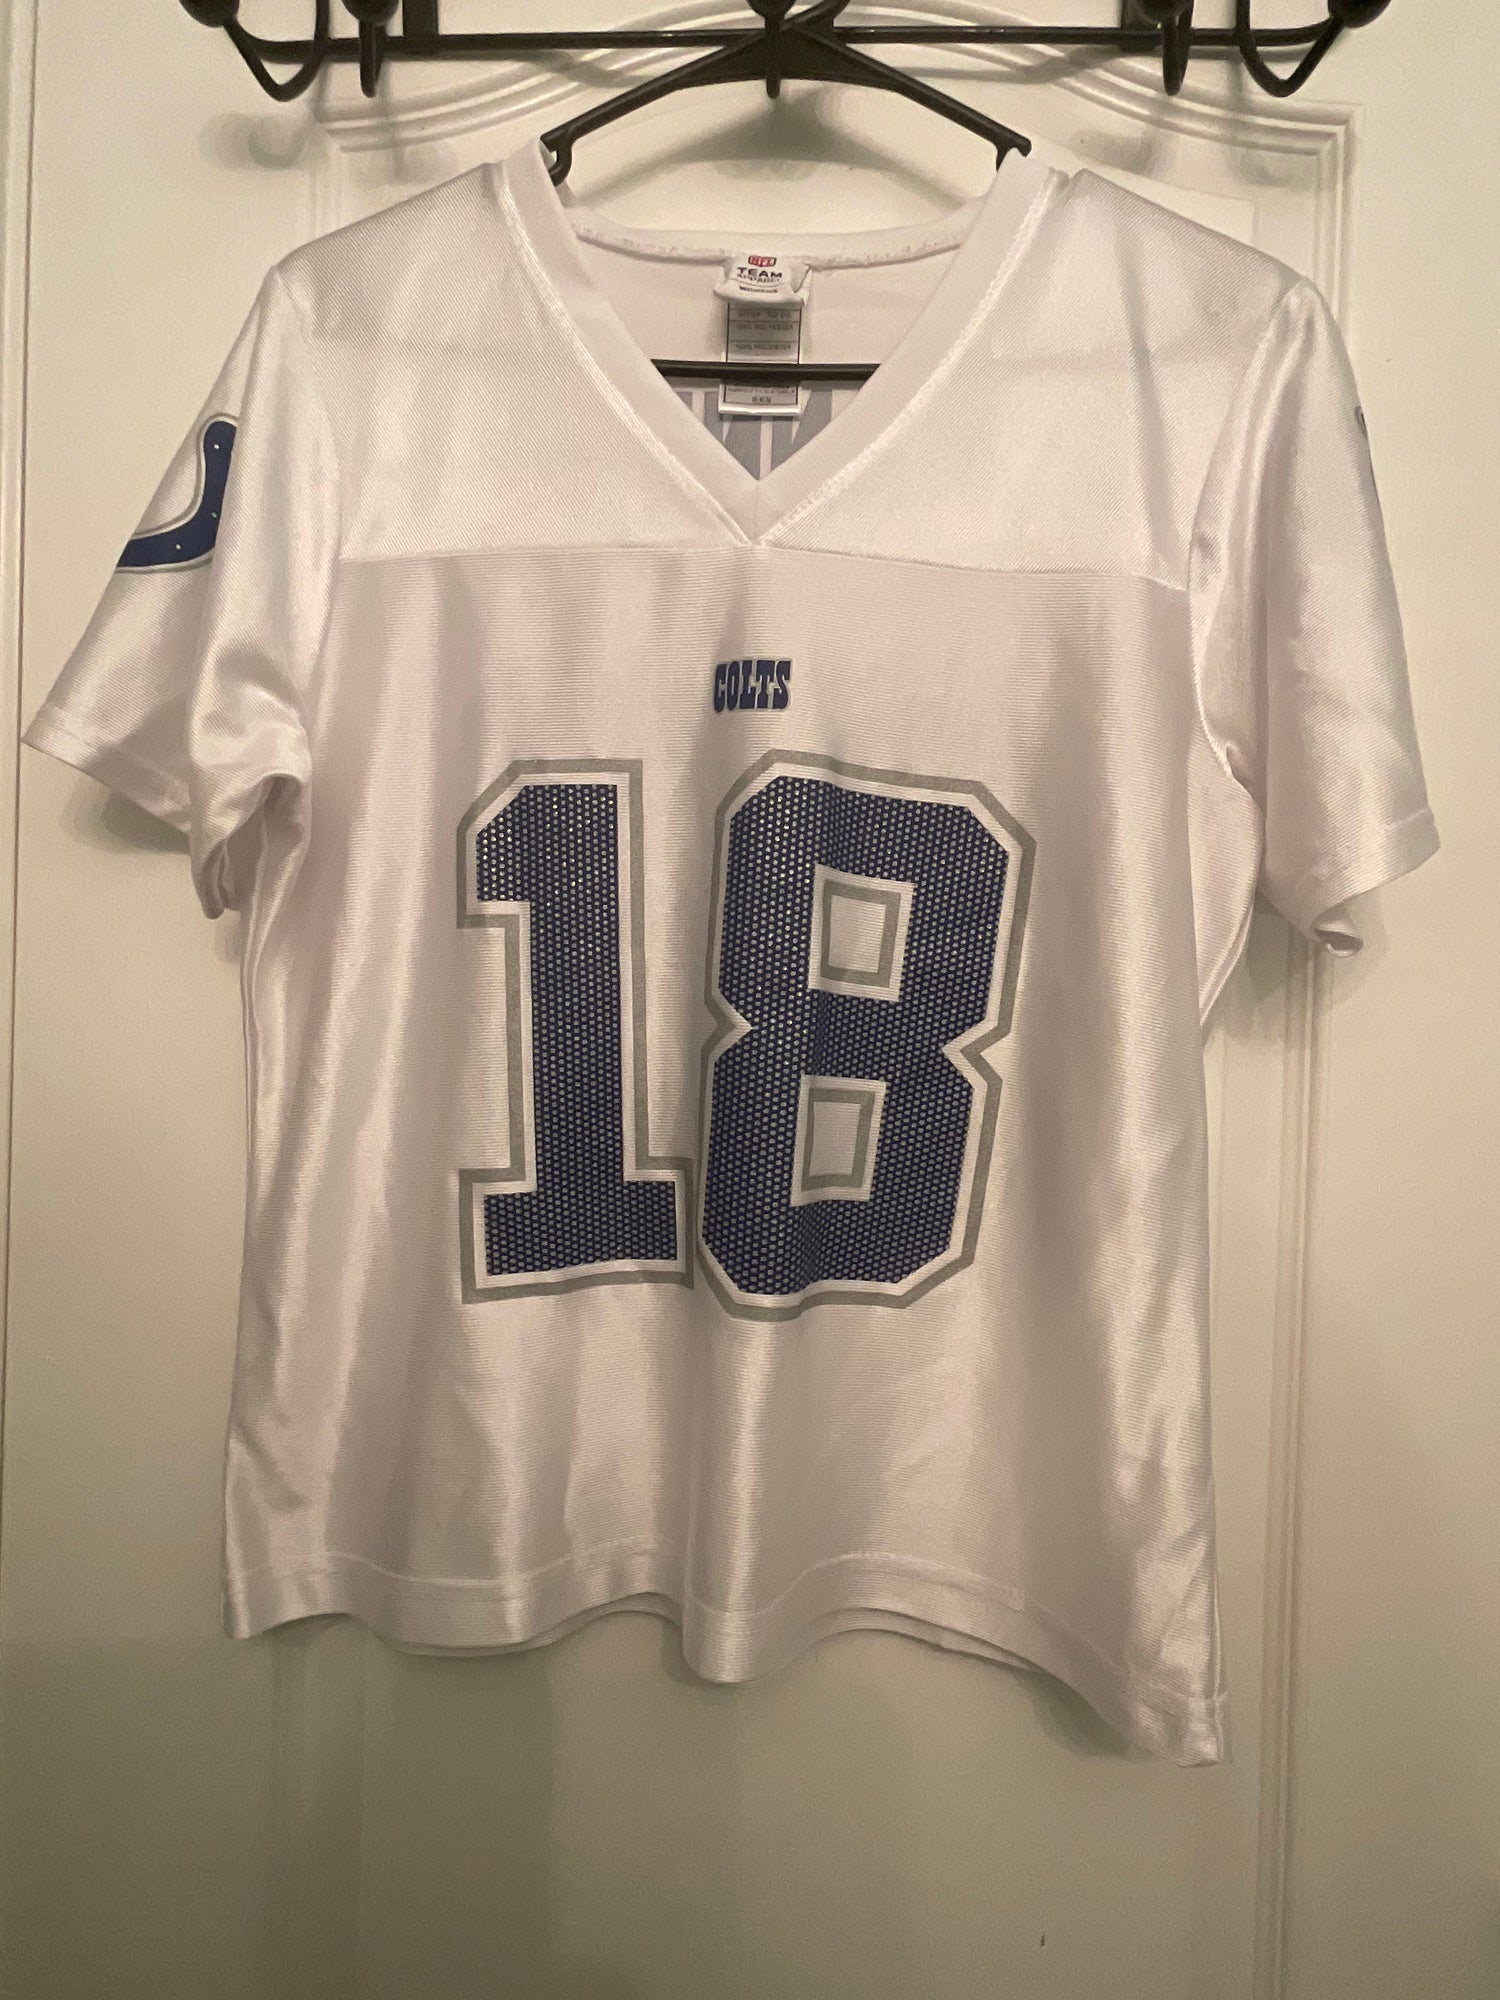 Indianapolis Colts player jersey shop